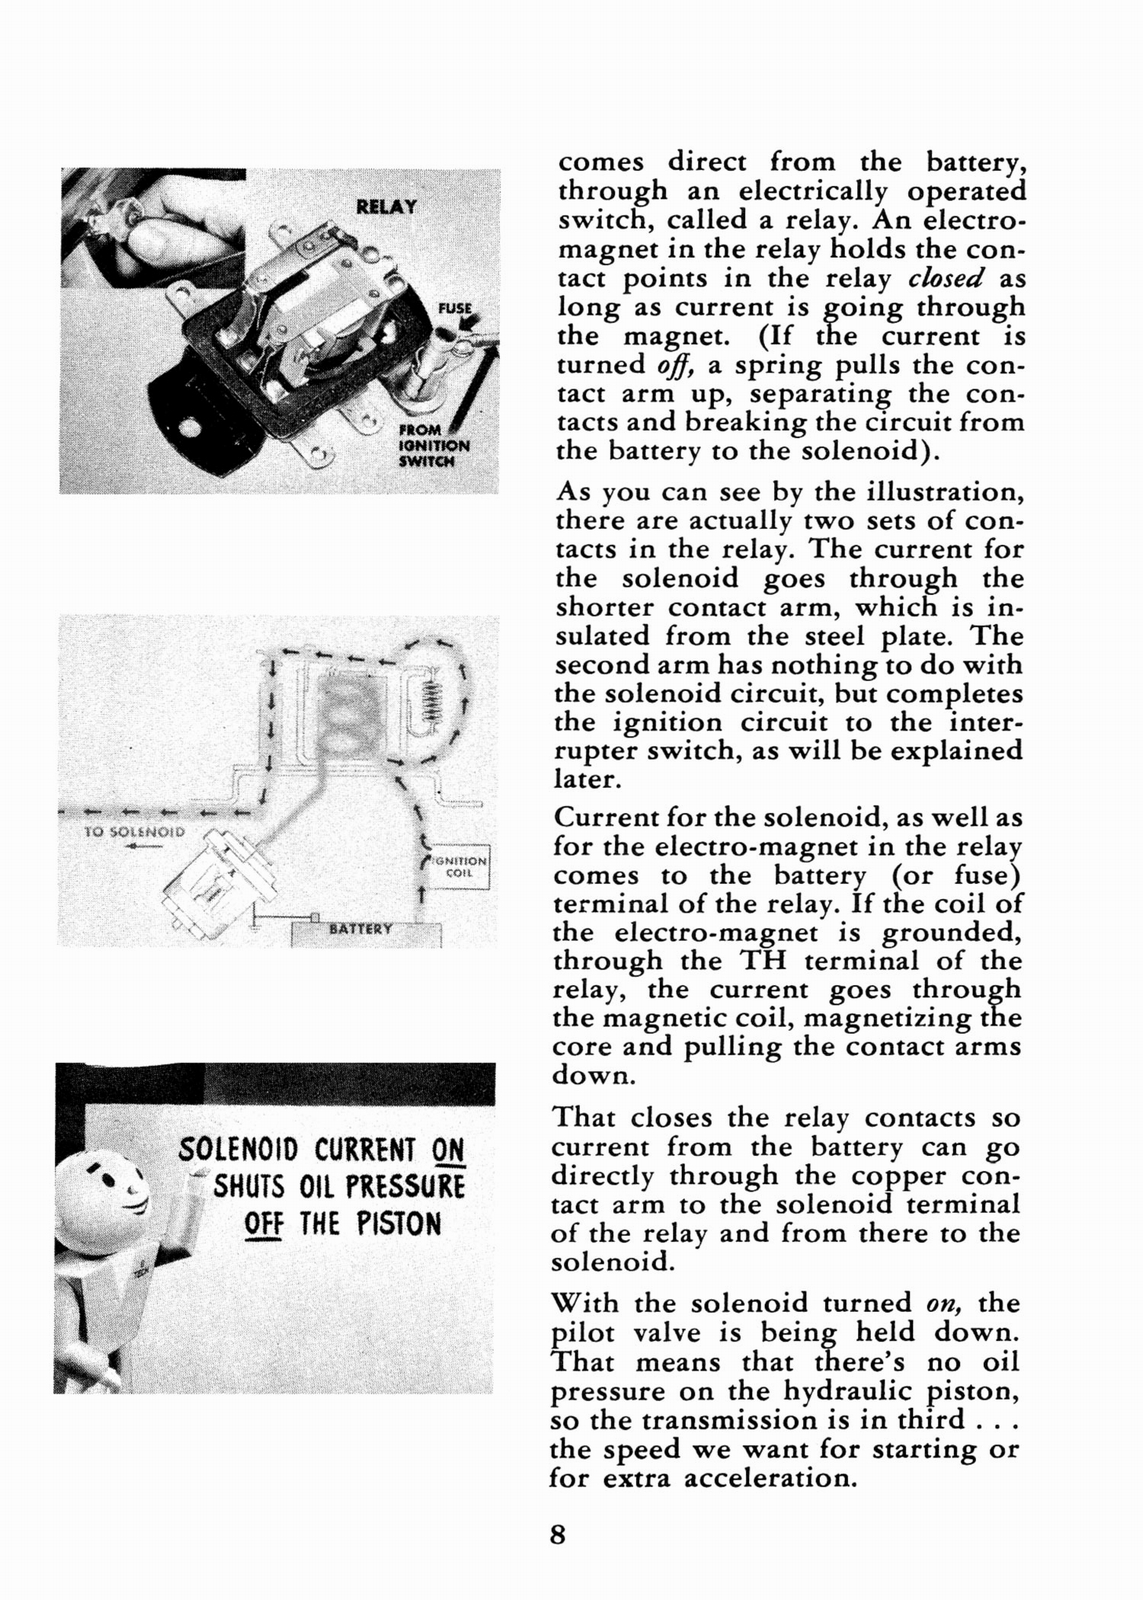 1948 Chrysler Fluid Drive Booklet Page 6